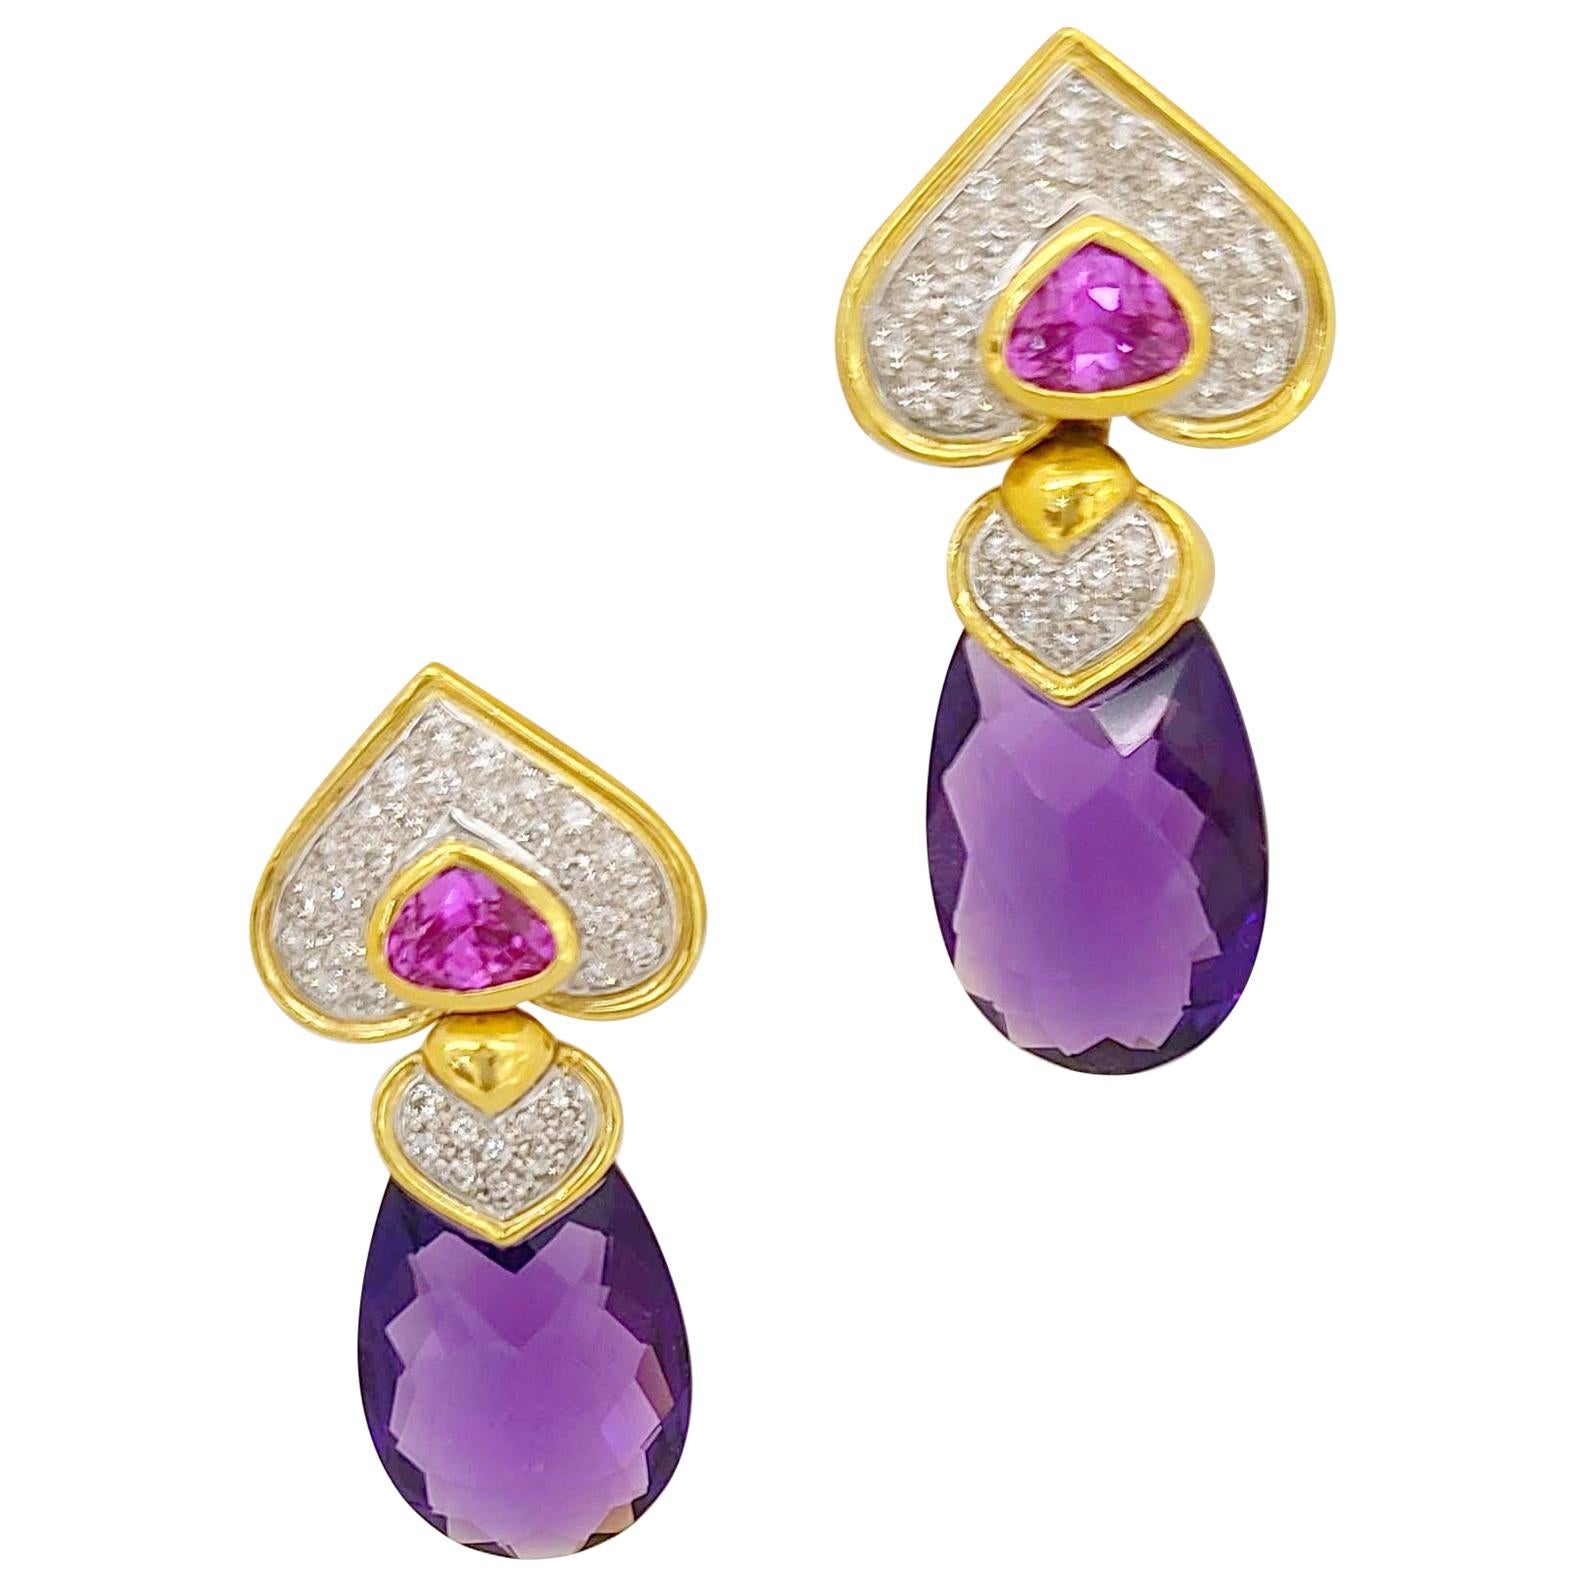 18KT Gold, 34.3Ct. Amethyst, 3.07Ct. Pink Tourmaline and Diamond Drop Earrings